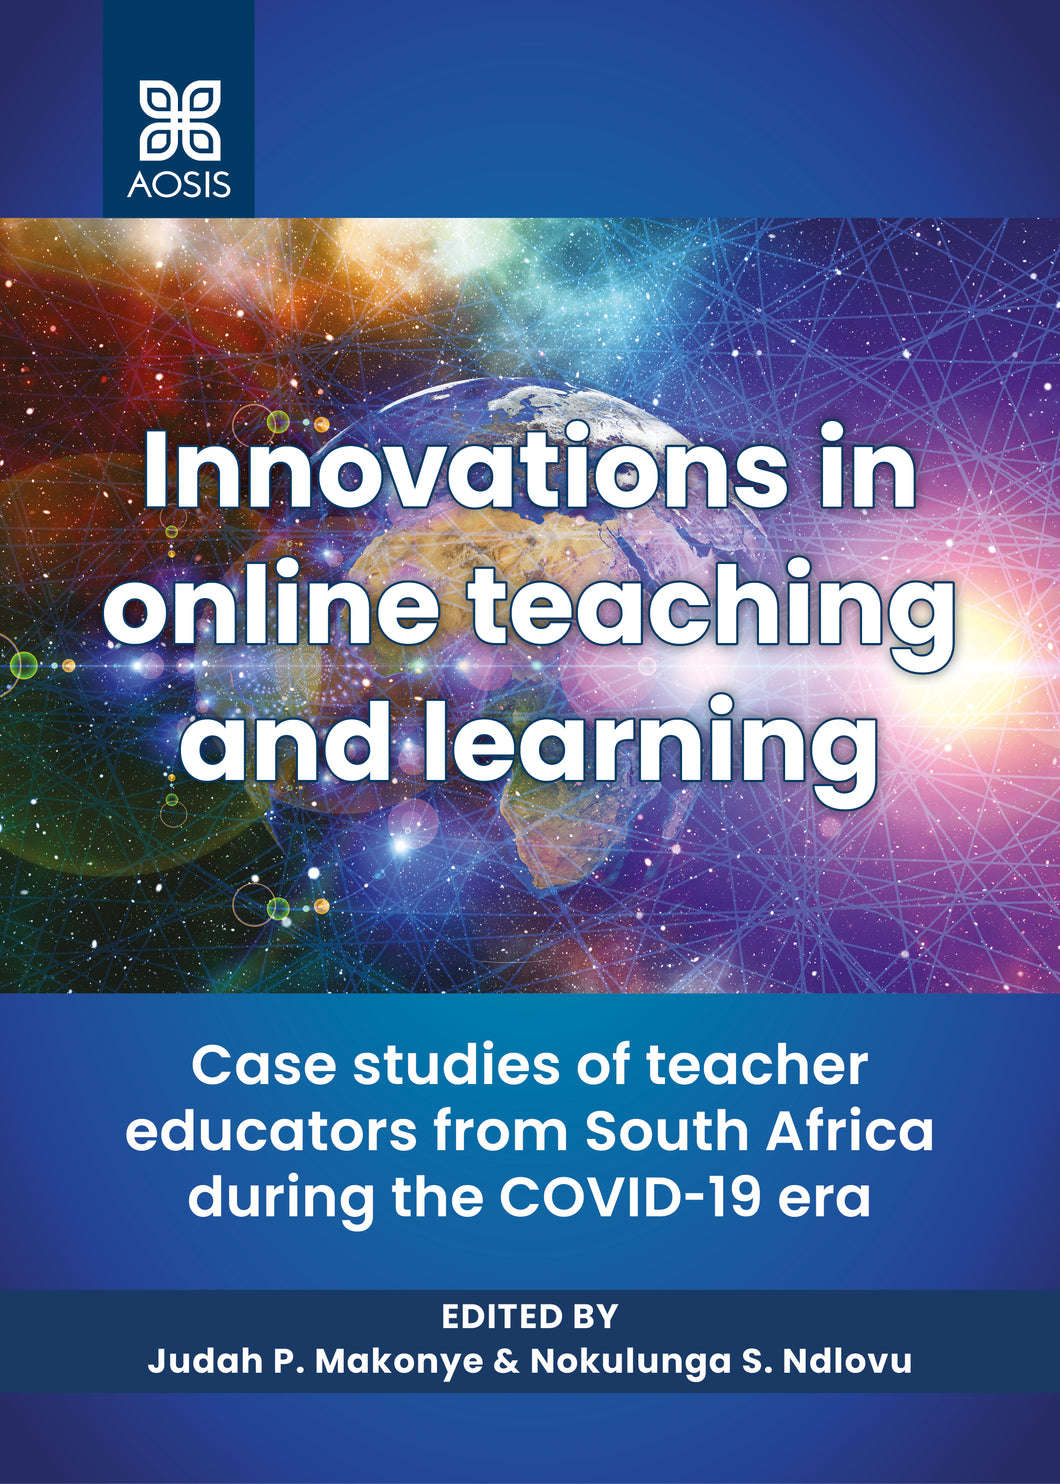 Innovations in online teaching and learning: Case studies of teacher educators from South Africa during the COVID-19 era